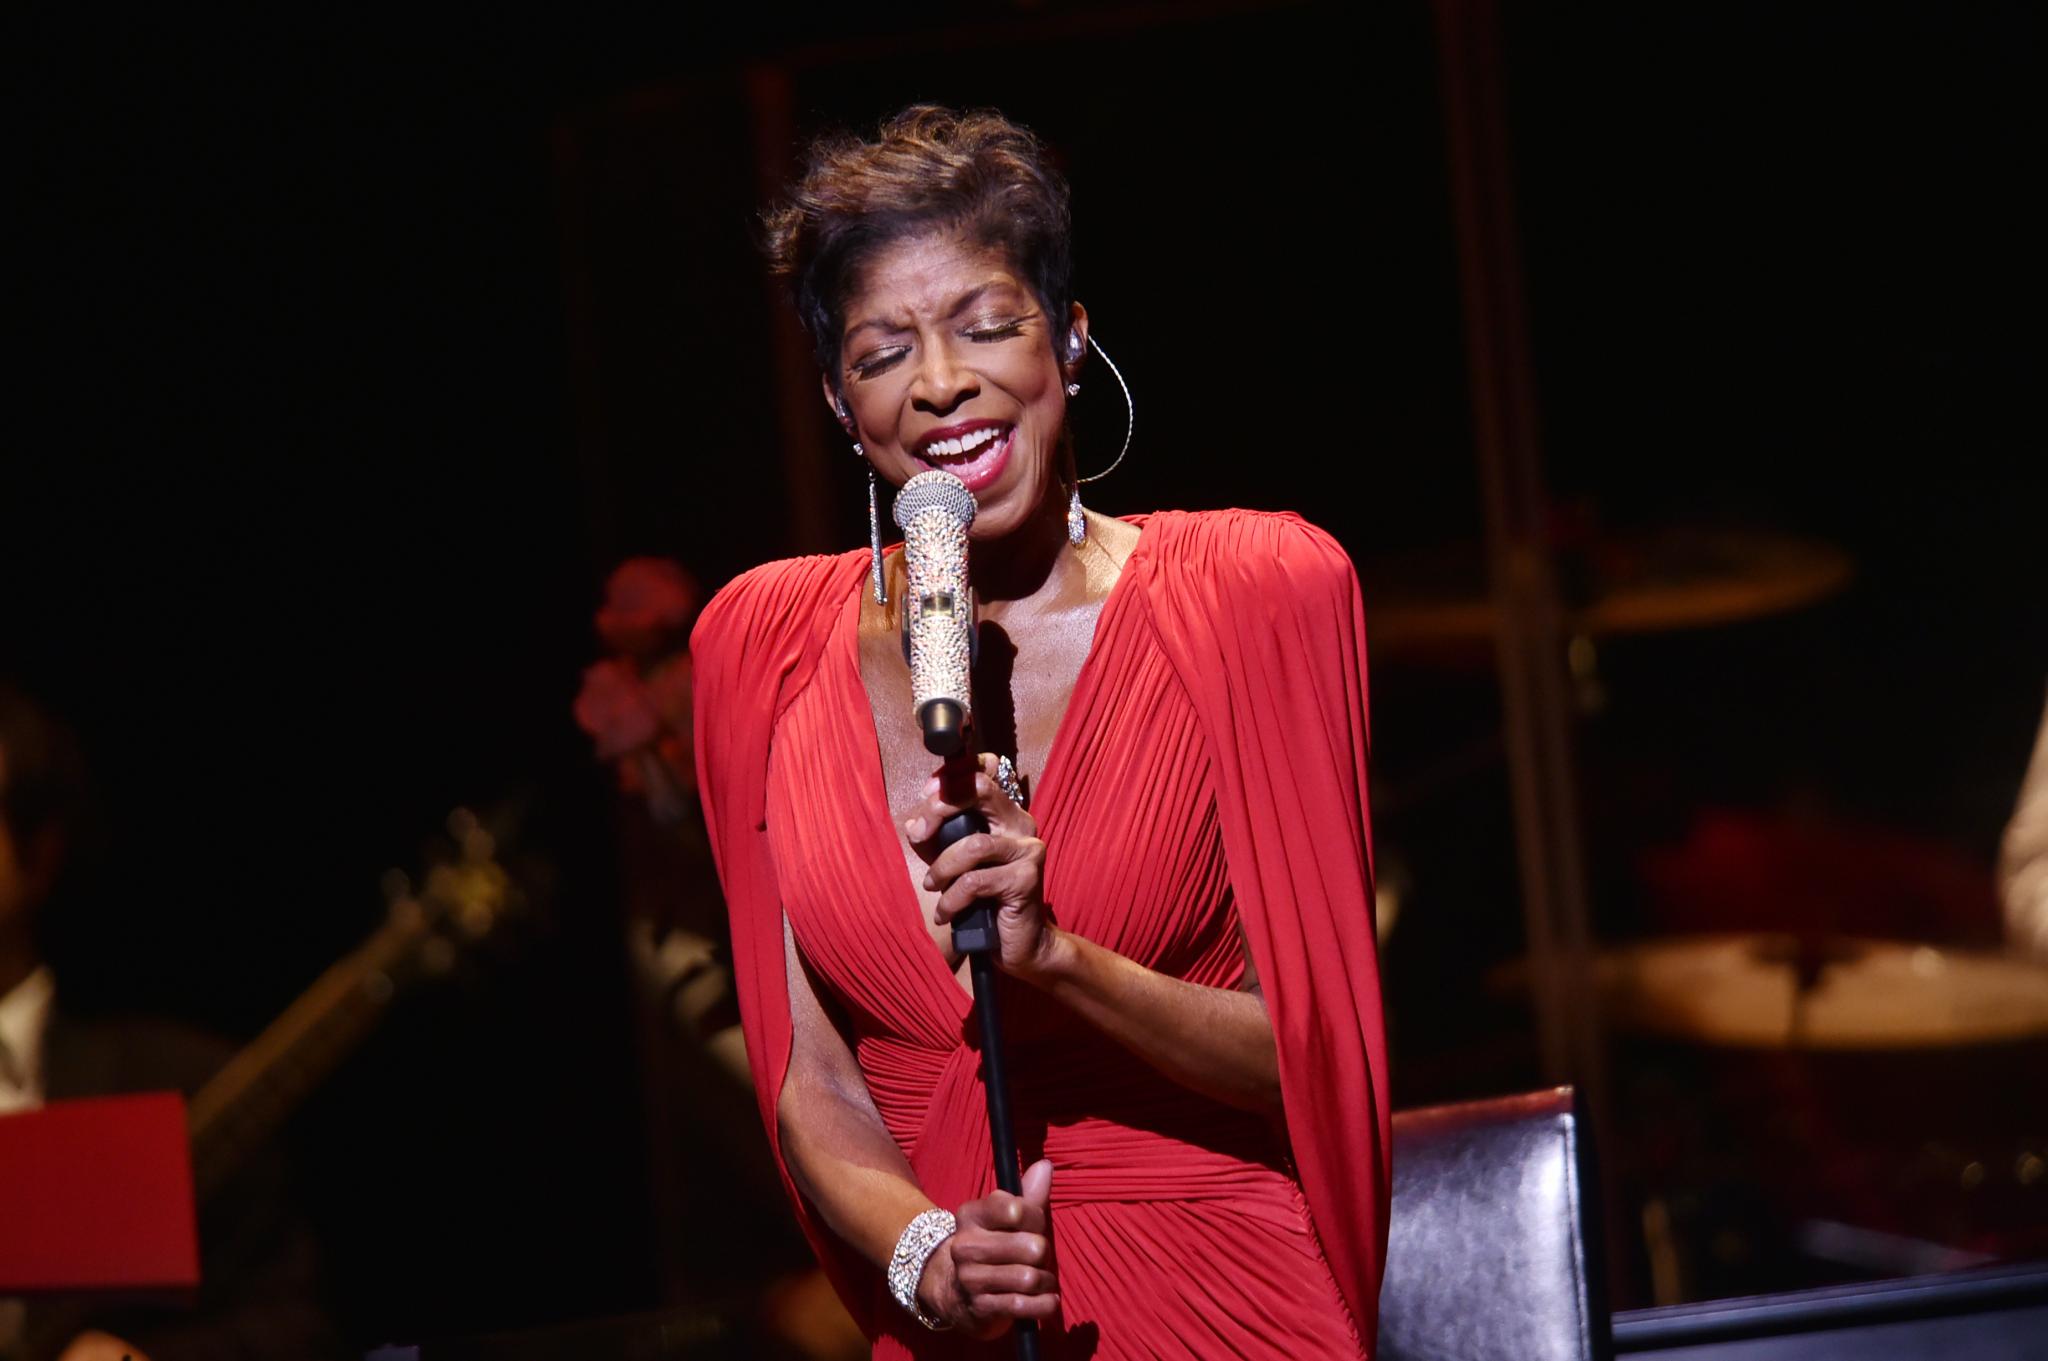 Unforgettable: Natalie Cole's Life in Pictures